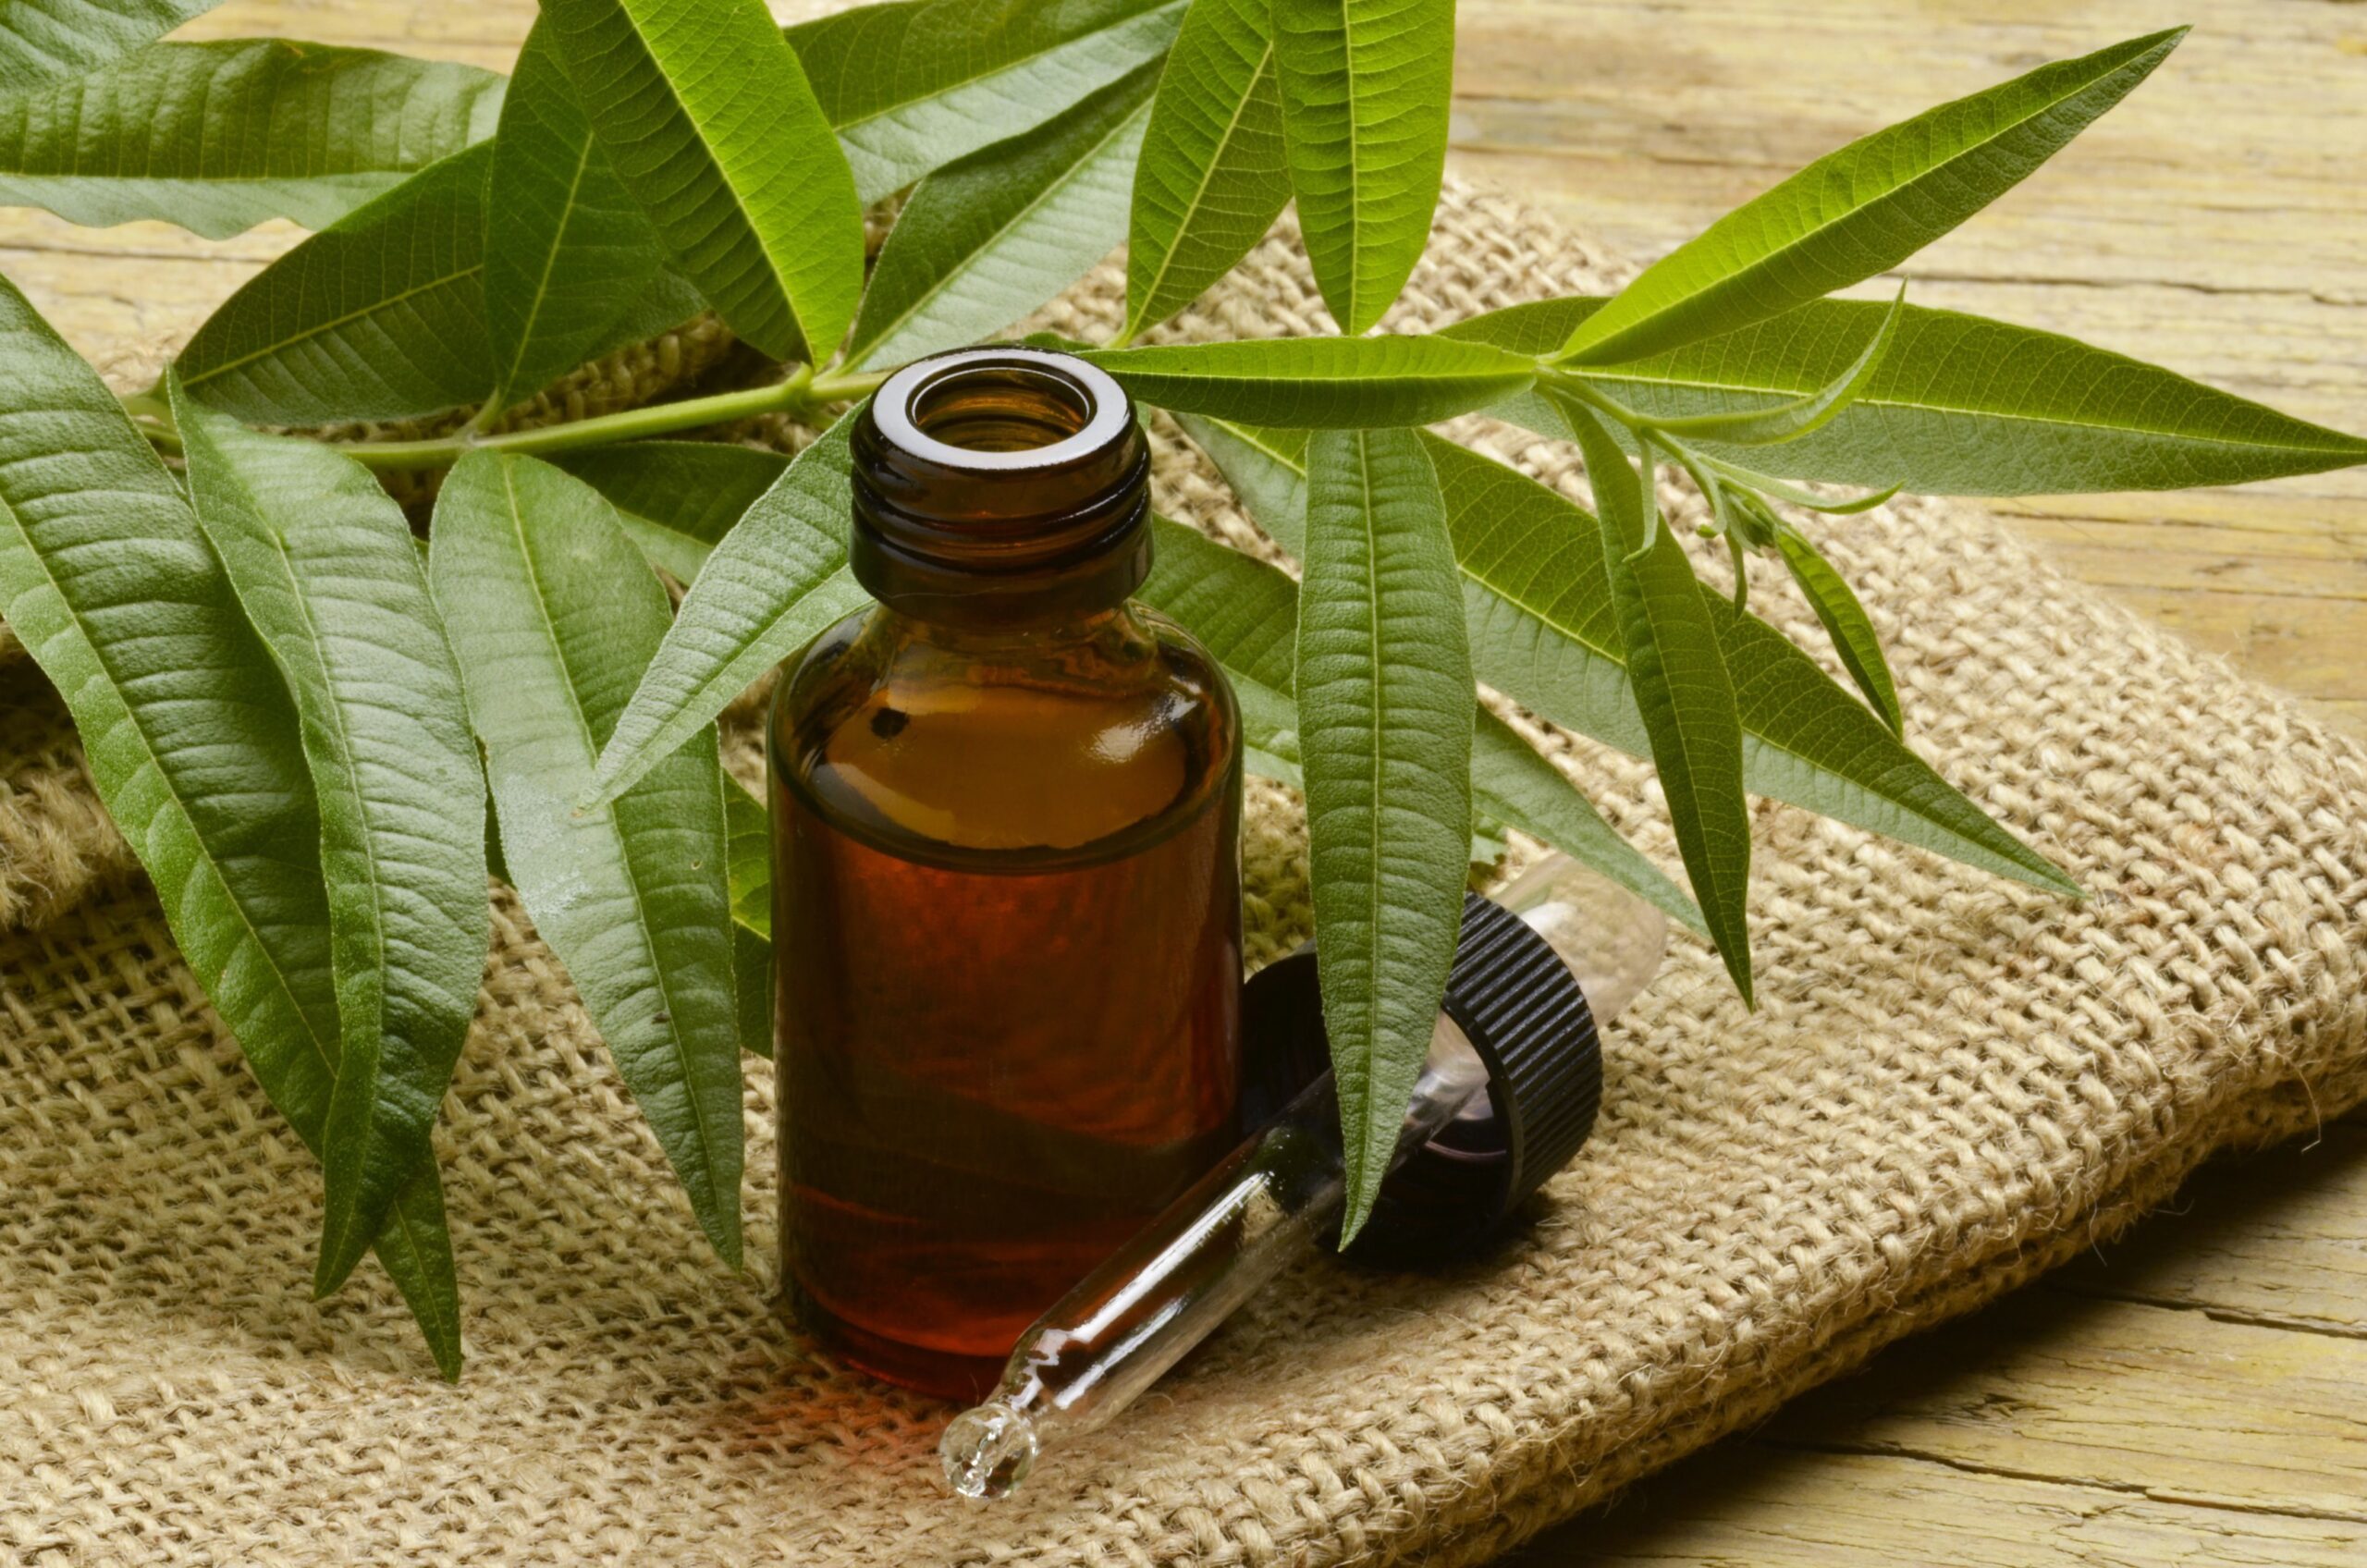 Tea Tree Oil Market Sales Footprint with Strategy Overview, Opportunity Map Analysis & Key facts-2027